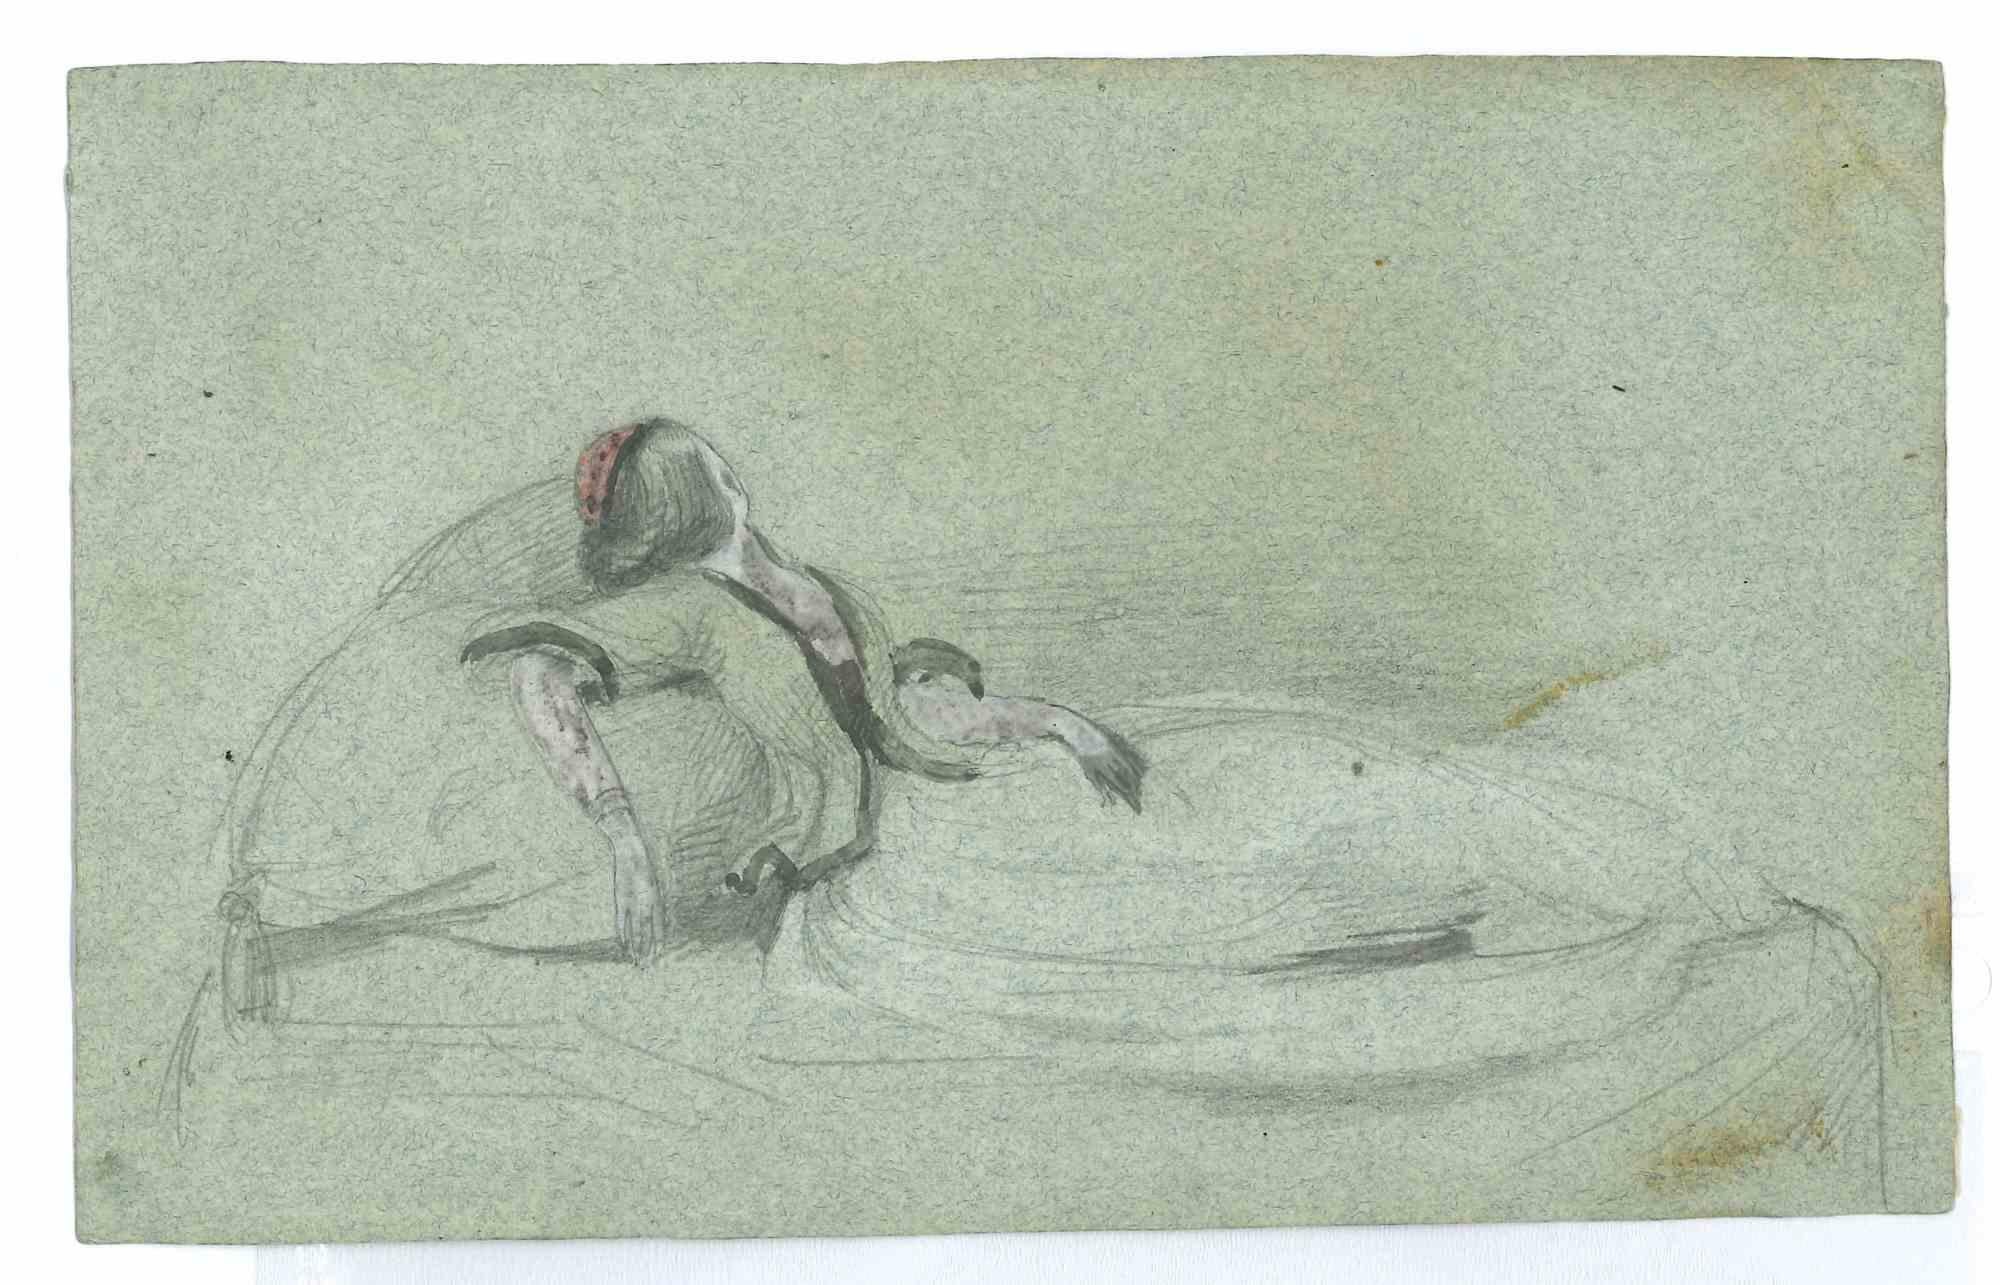 Woman Dreaming On The Water is an original drawing in pencil and watercolor on cardboard realized by Achille Devezie (1802--1857) in the 1830s.

In good conditions.

The artwork is depicted through delicate and fine strokes which is represented